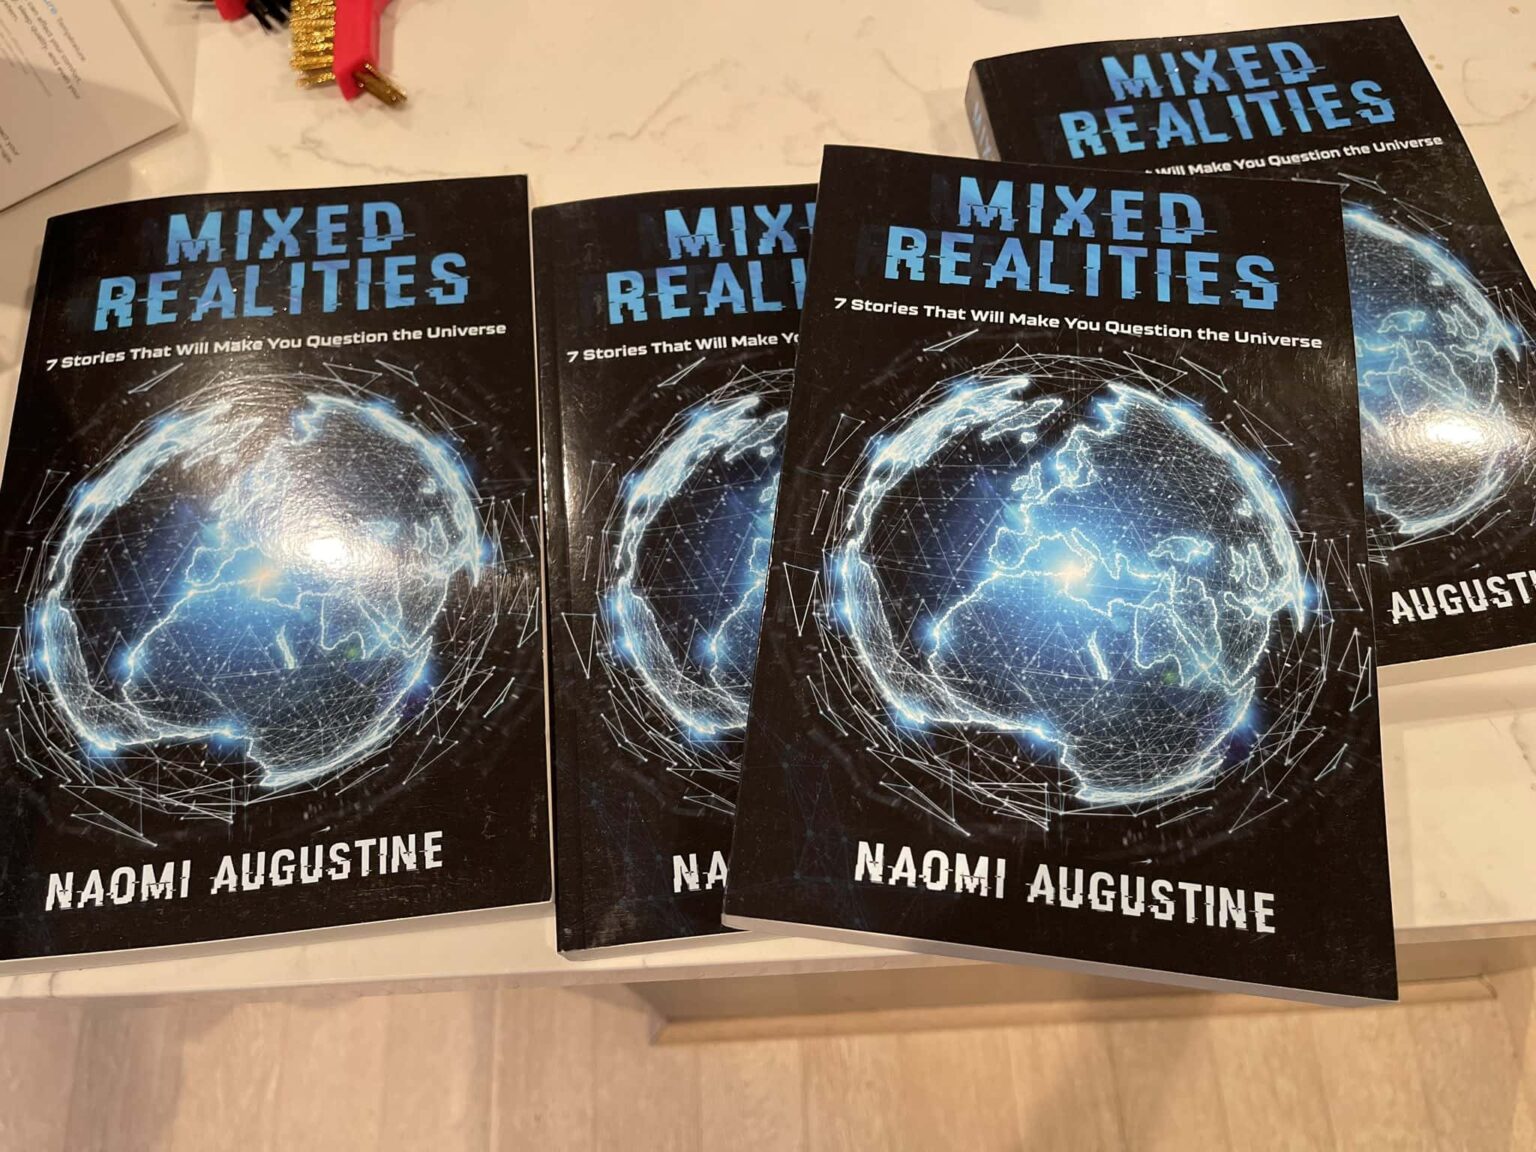 Naomi Augustine is inventing new narrative forms, fusing old media with new technology. Enter the future with her latest book 'Mixed Realities'.